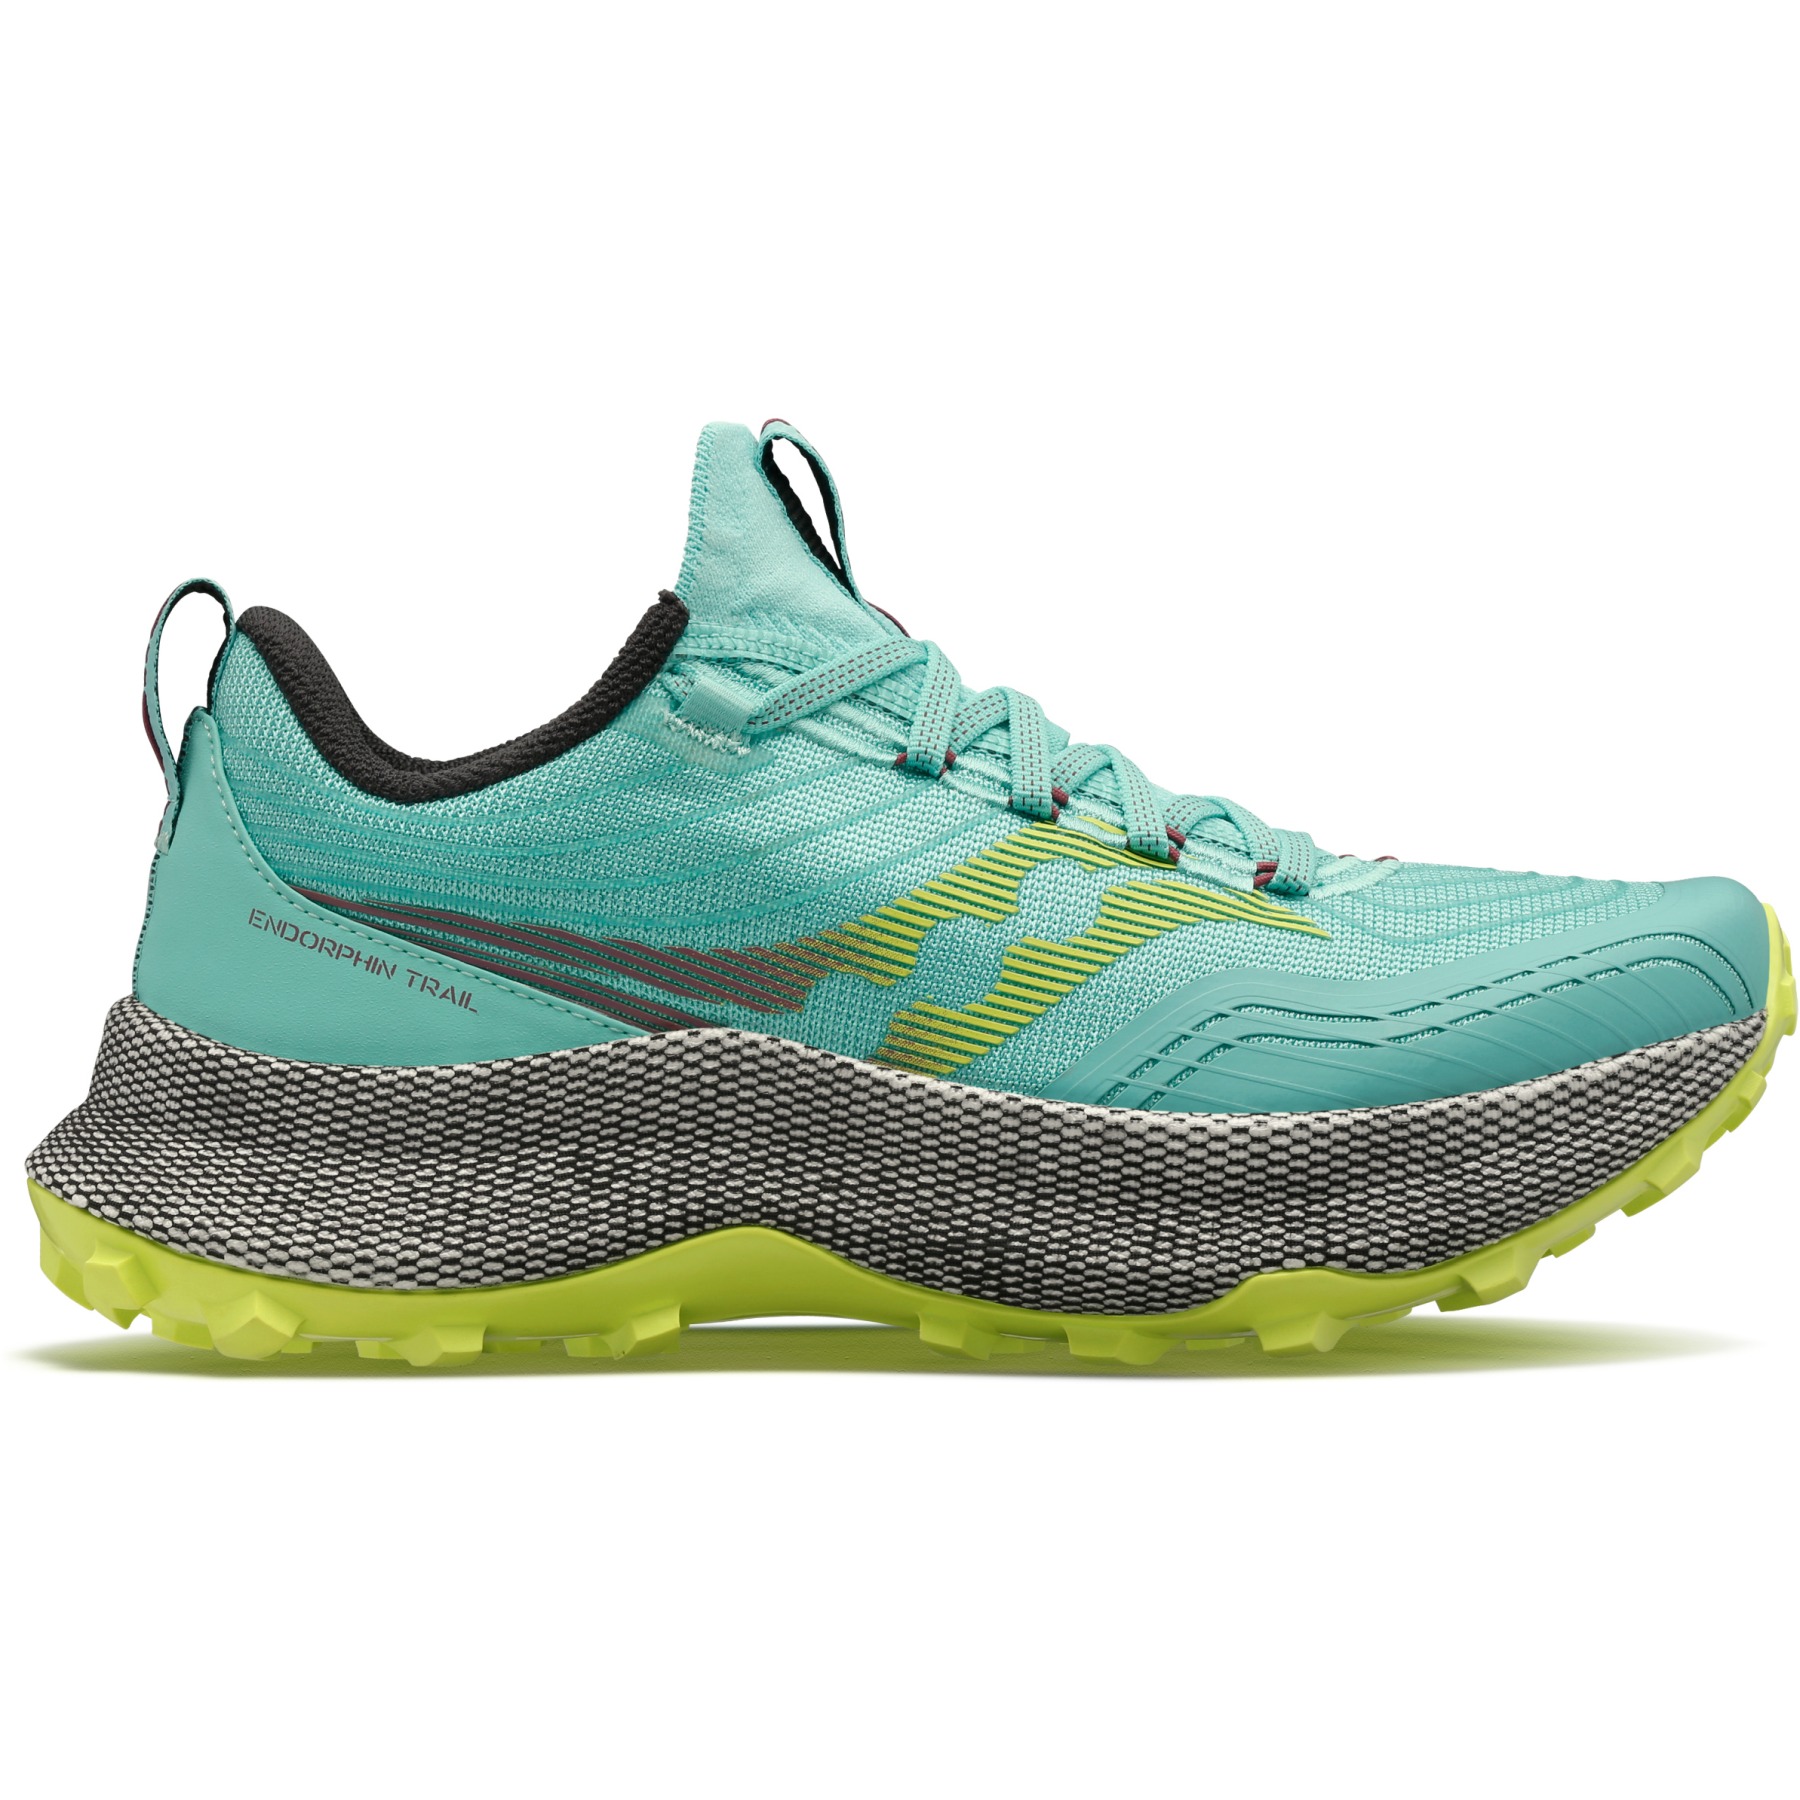 Image of Saucony Endorphin Trail Women's Trail Running Shoes - cool mint/acid